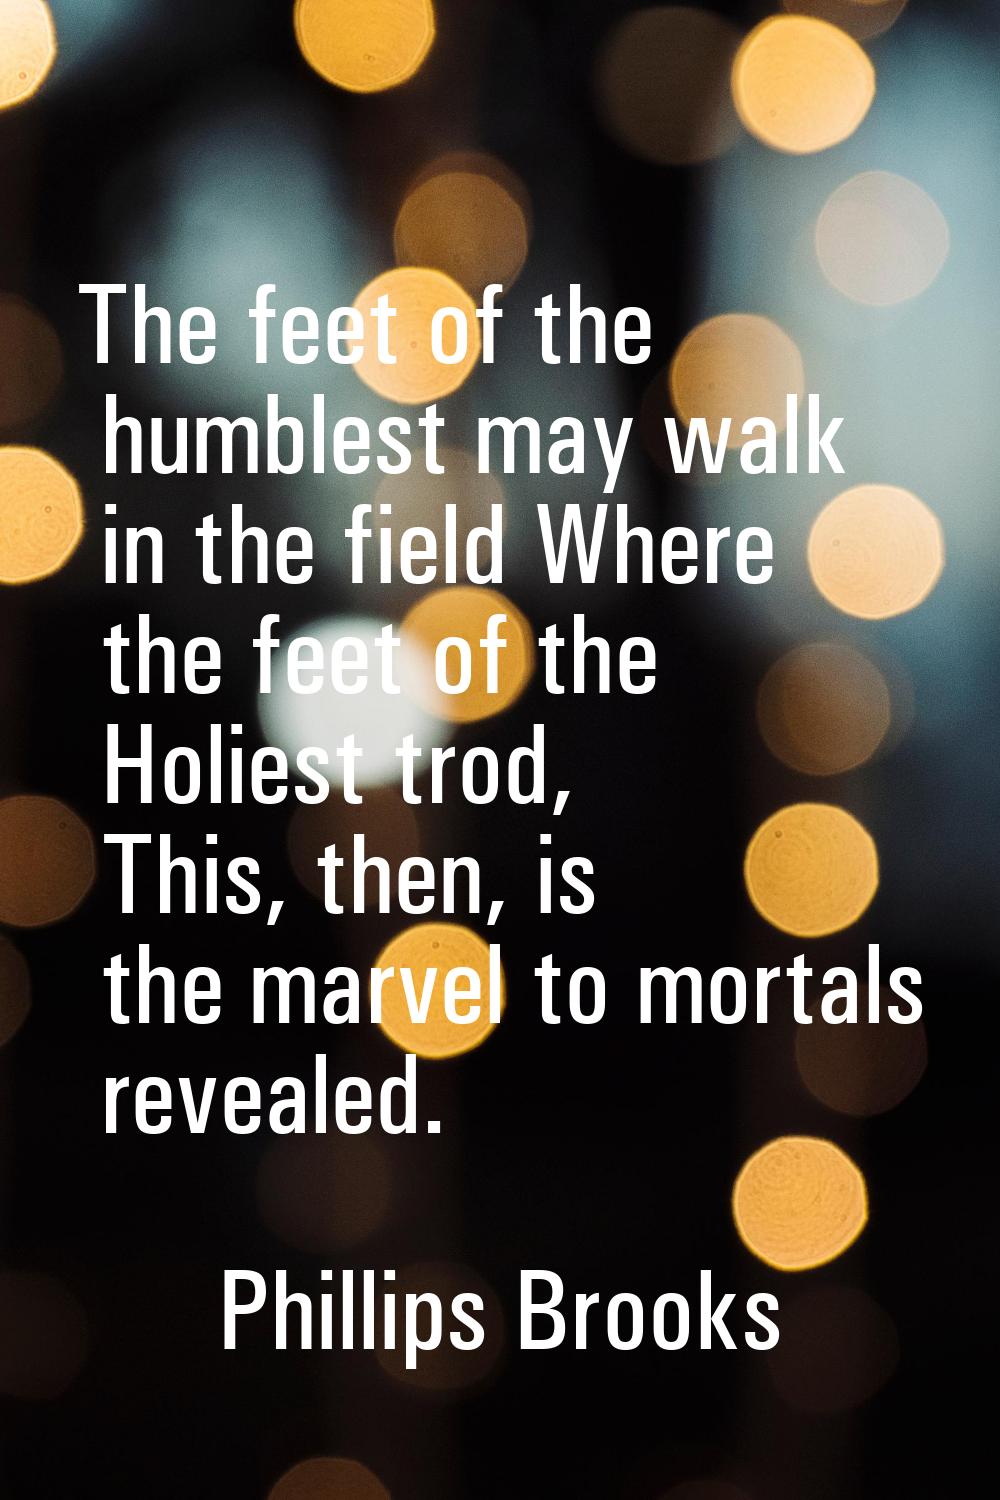 The feet of the humblest may walk in the field Where the feet of the Holiest trod, This, then, is t